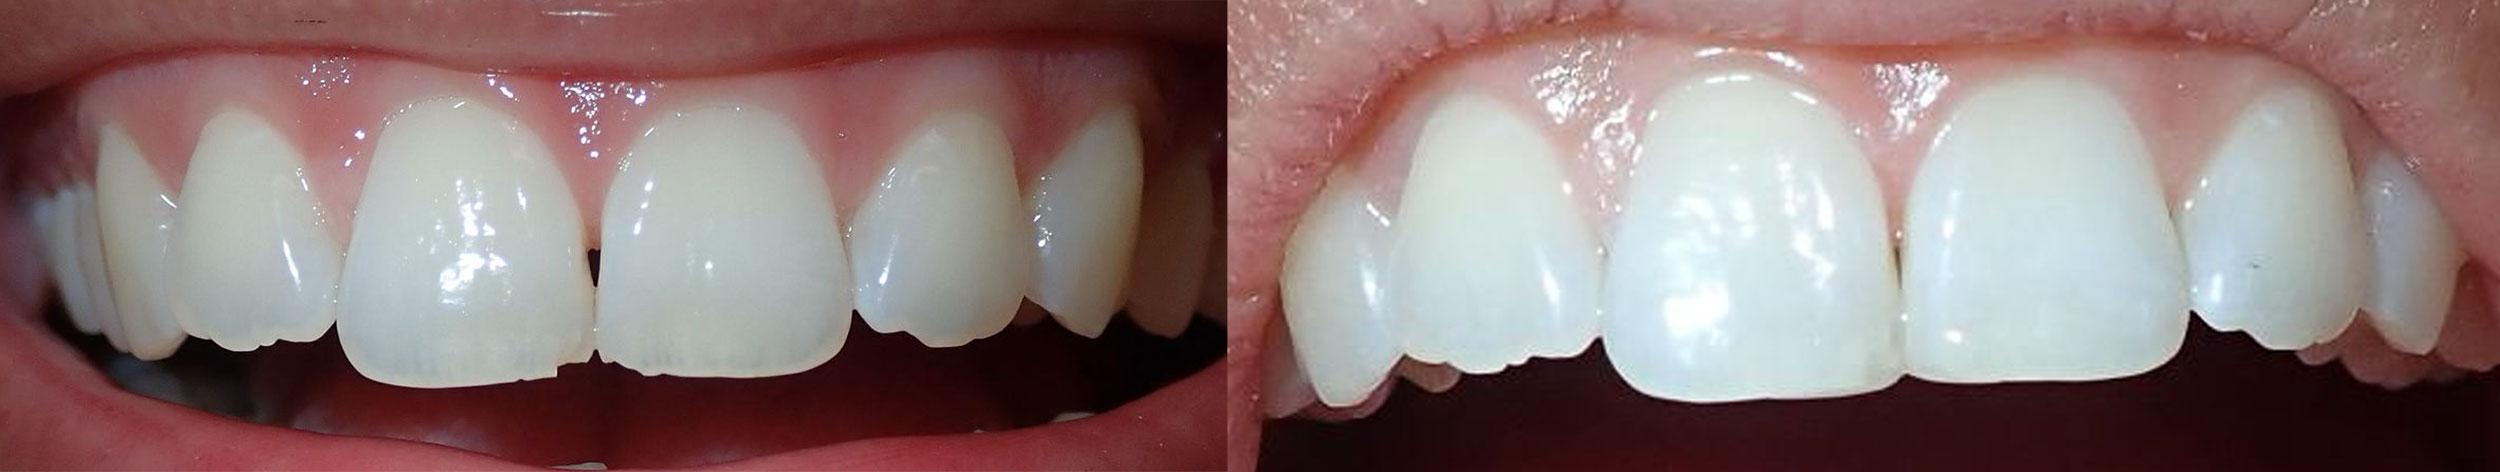 child with a chipped tooth needing dental procedure